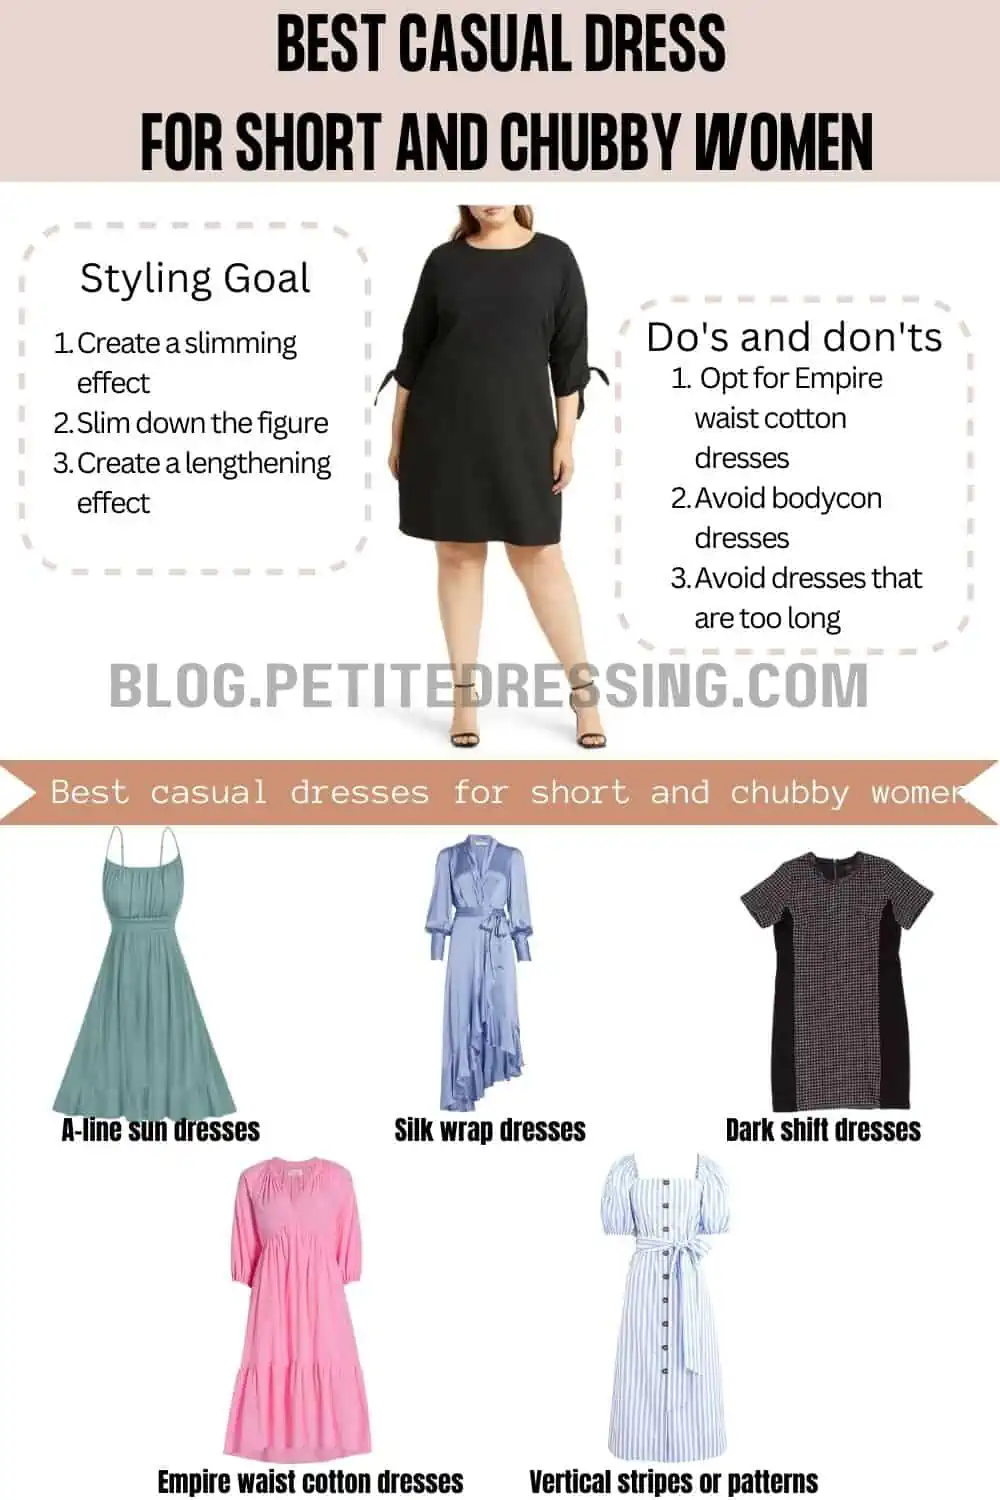 Party Dresses Guide for Short and Chubby Women - Petite Dressing